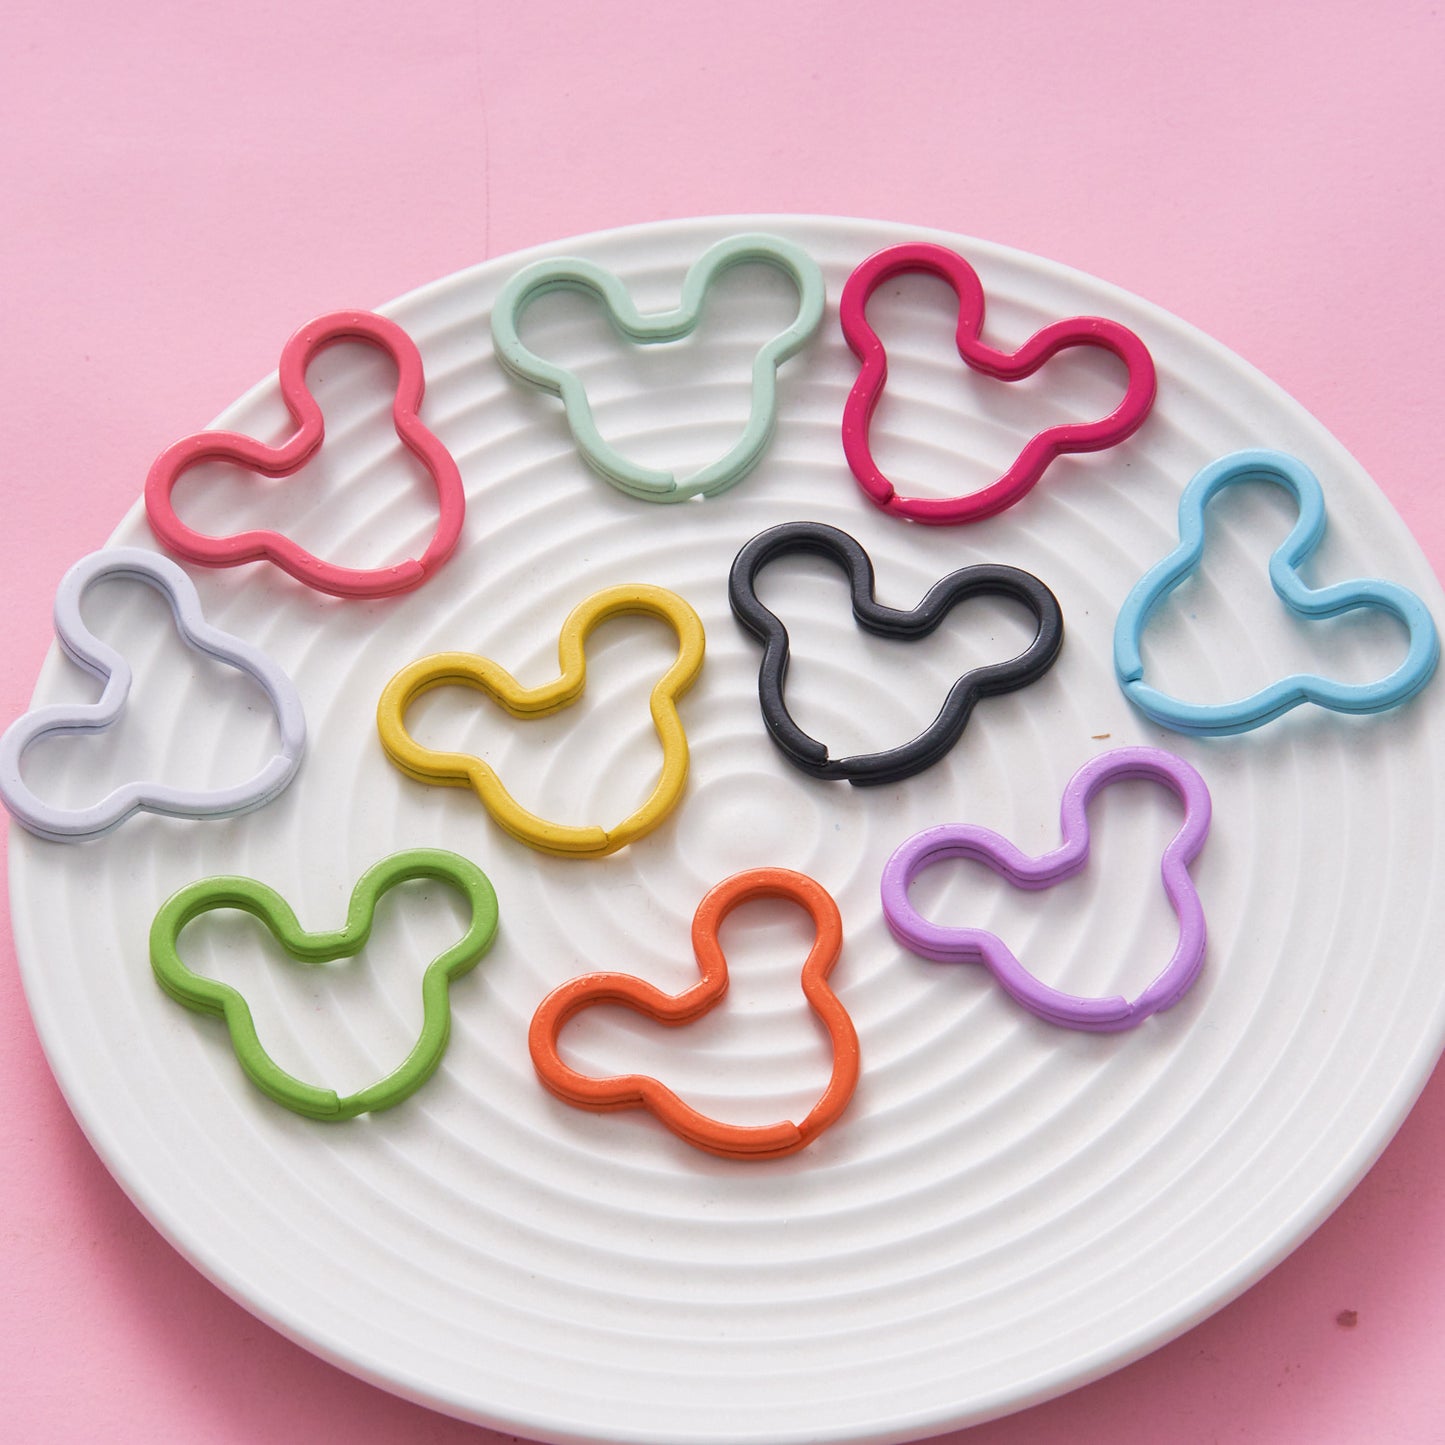 20 Pieces Mickey Shape Ring Buckle for DIY Keychain Phone Chain